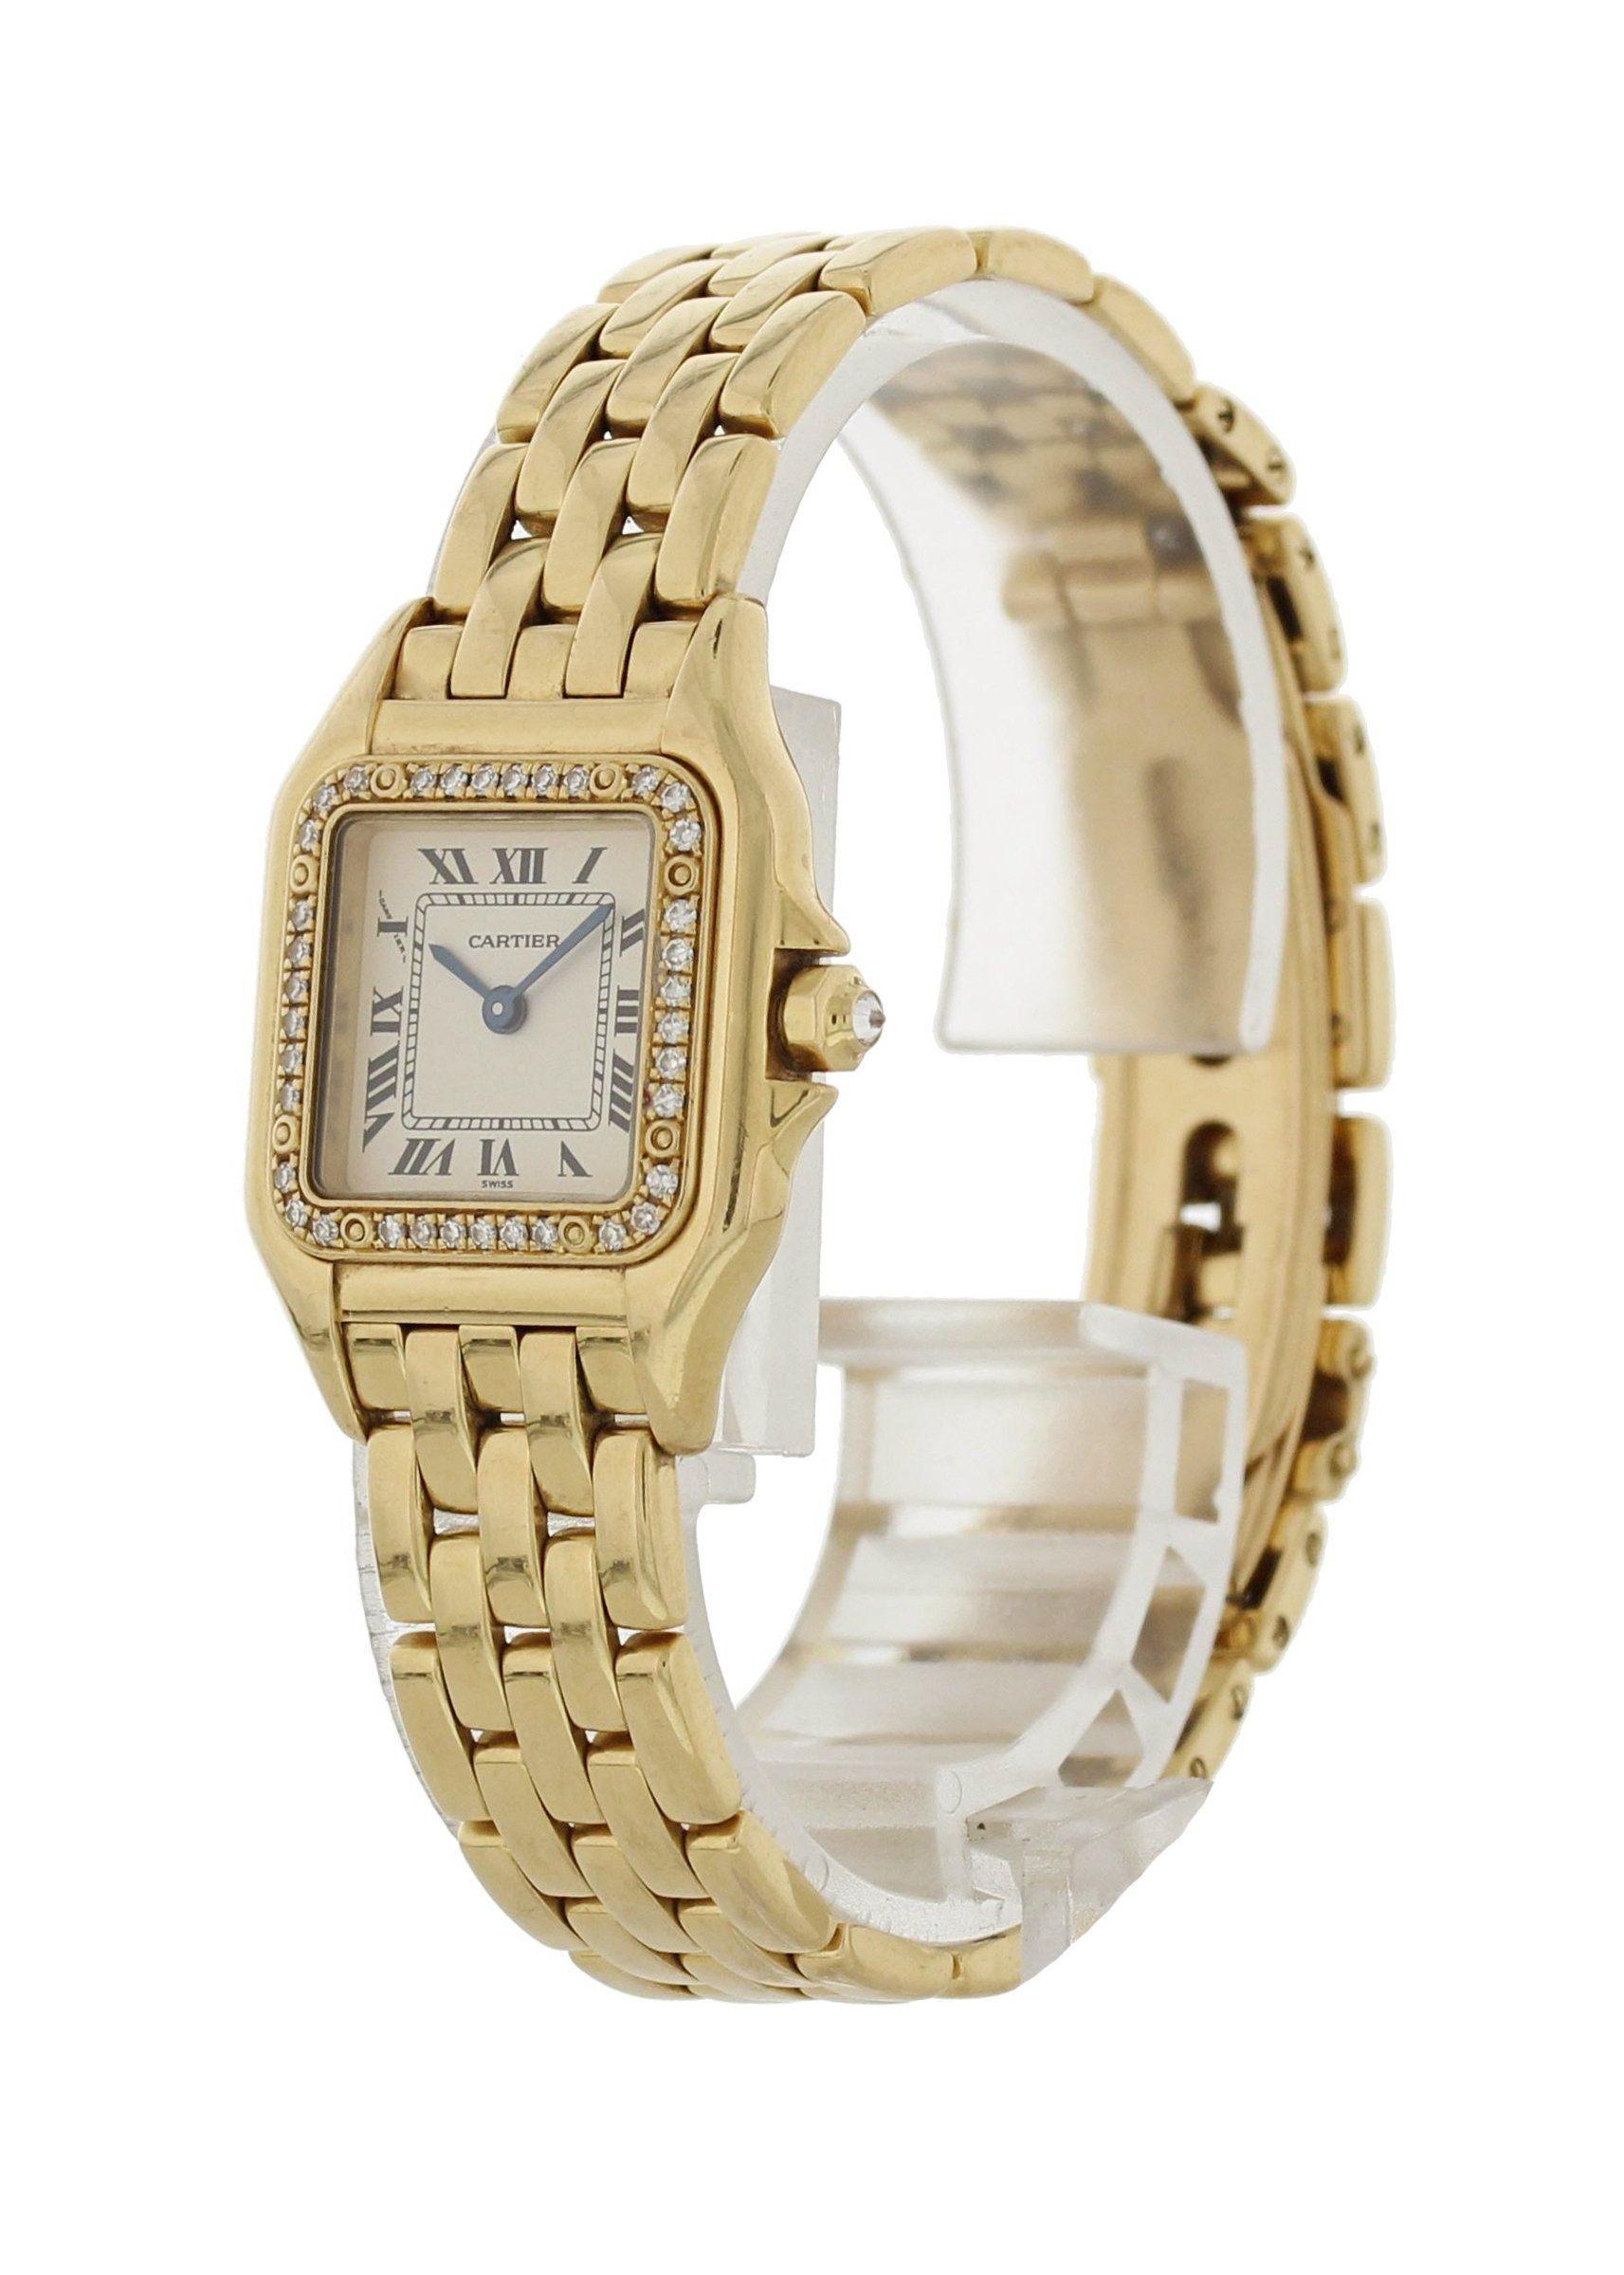 Cartier Panthere 1280 Ladies Watch. 22mm 18K Yellow Gold case with factory set diamonds. Factory diamond bezel. Off-white dial with black Roman numerals and blue hands. 18K Yellow gold bracelet with hidden butterfly clasp. Will fit up to a 6-inch